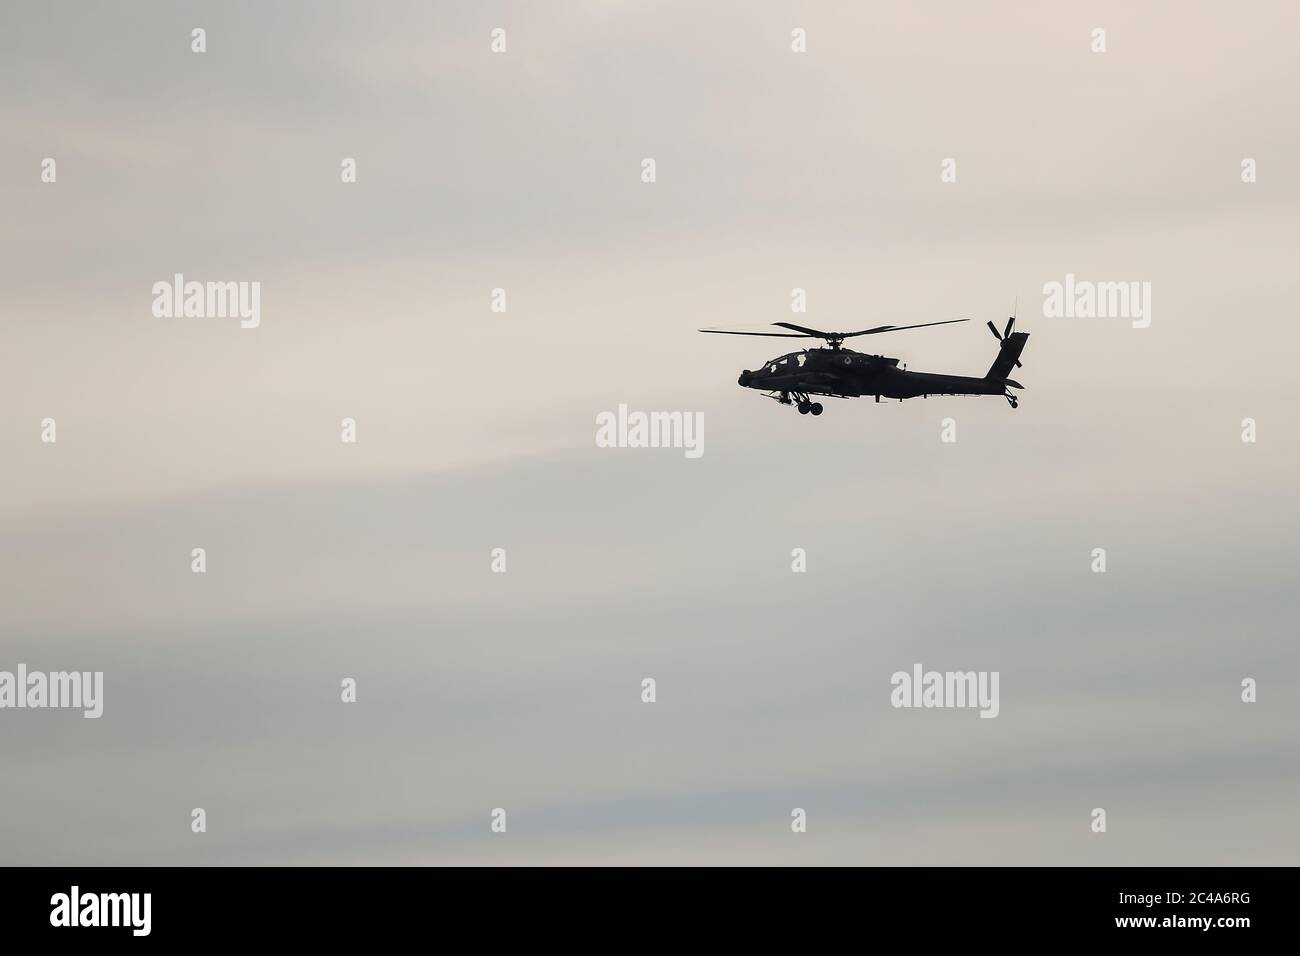 Askos, Greece - Feb 14, 2020: AH-64 Apache Helicopter takes part at a international military exercise with real fire (Golden Fleece -20) between Greek Stock Photo